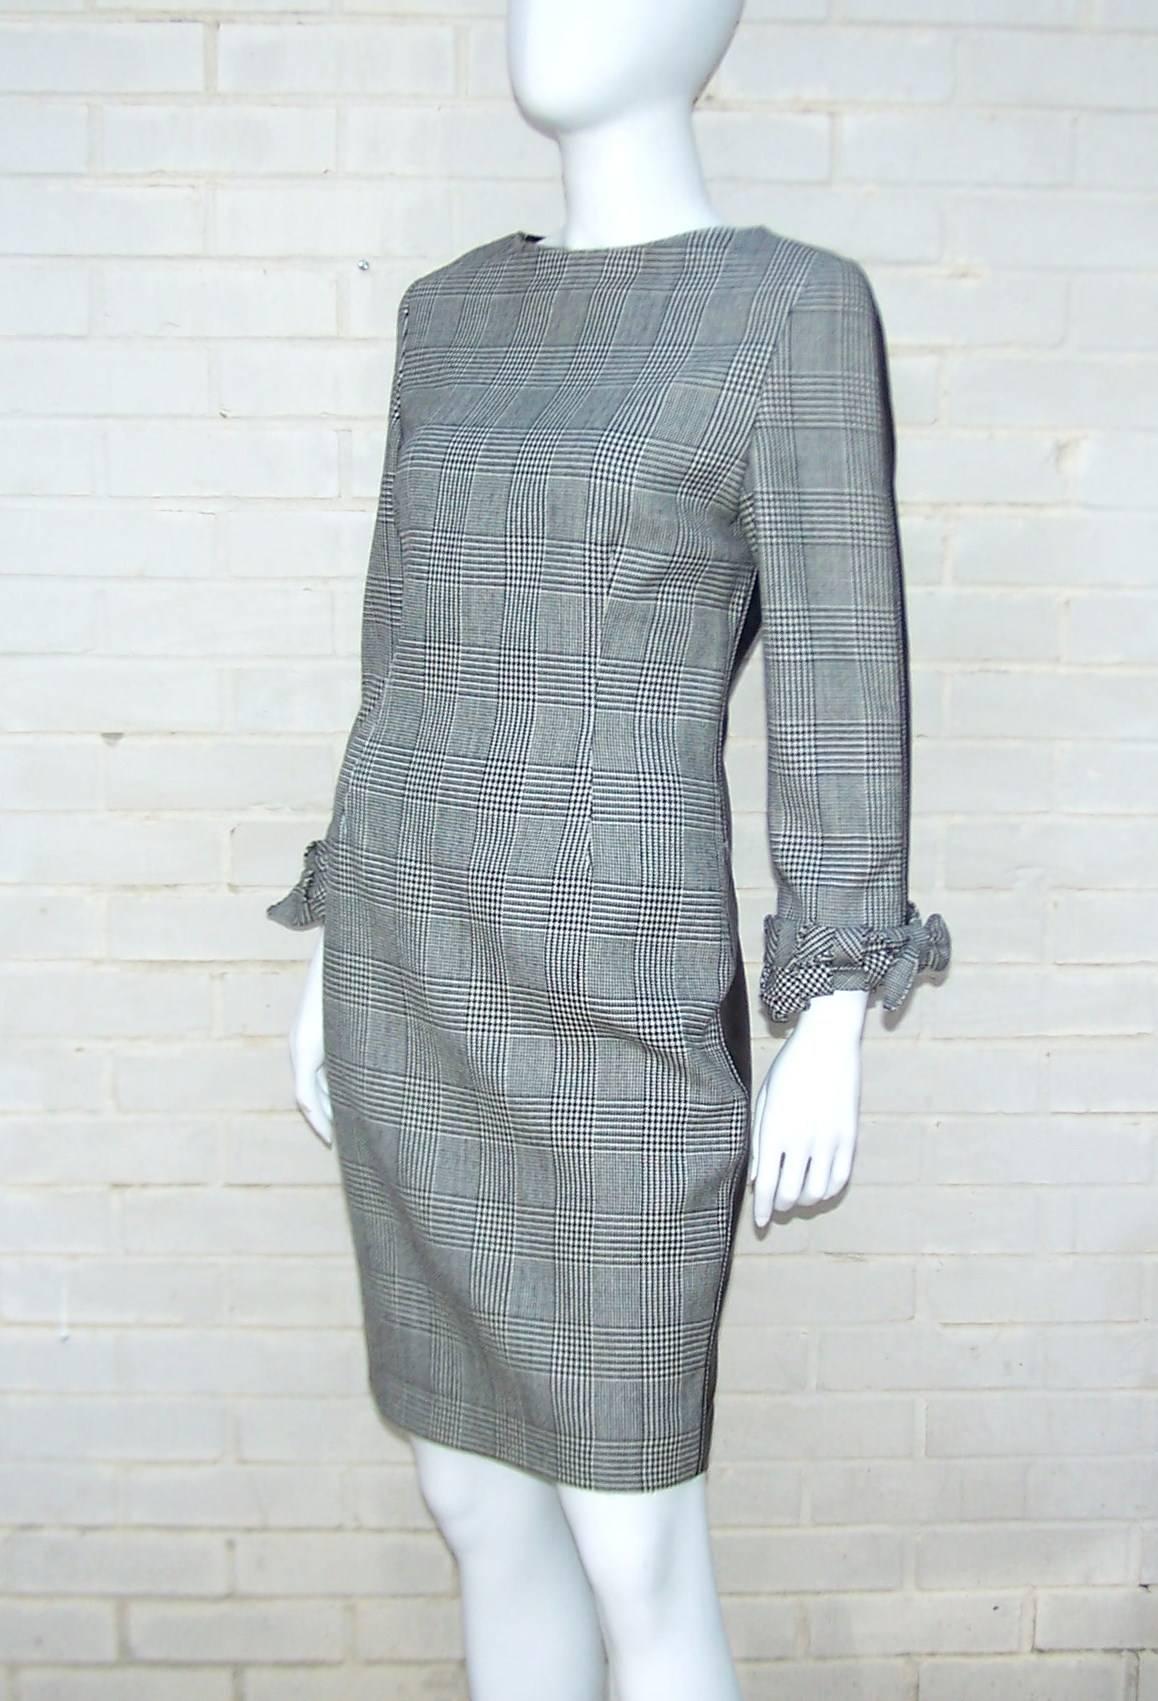 Wowza!  Make a ladylike impression from the front with a demure glen plaid wool dress and then catch their attention with form fitting black leather at the back.  The white contrast stitching on the leather and the lovely basket weave cuffs on the